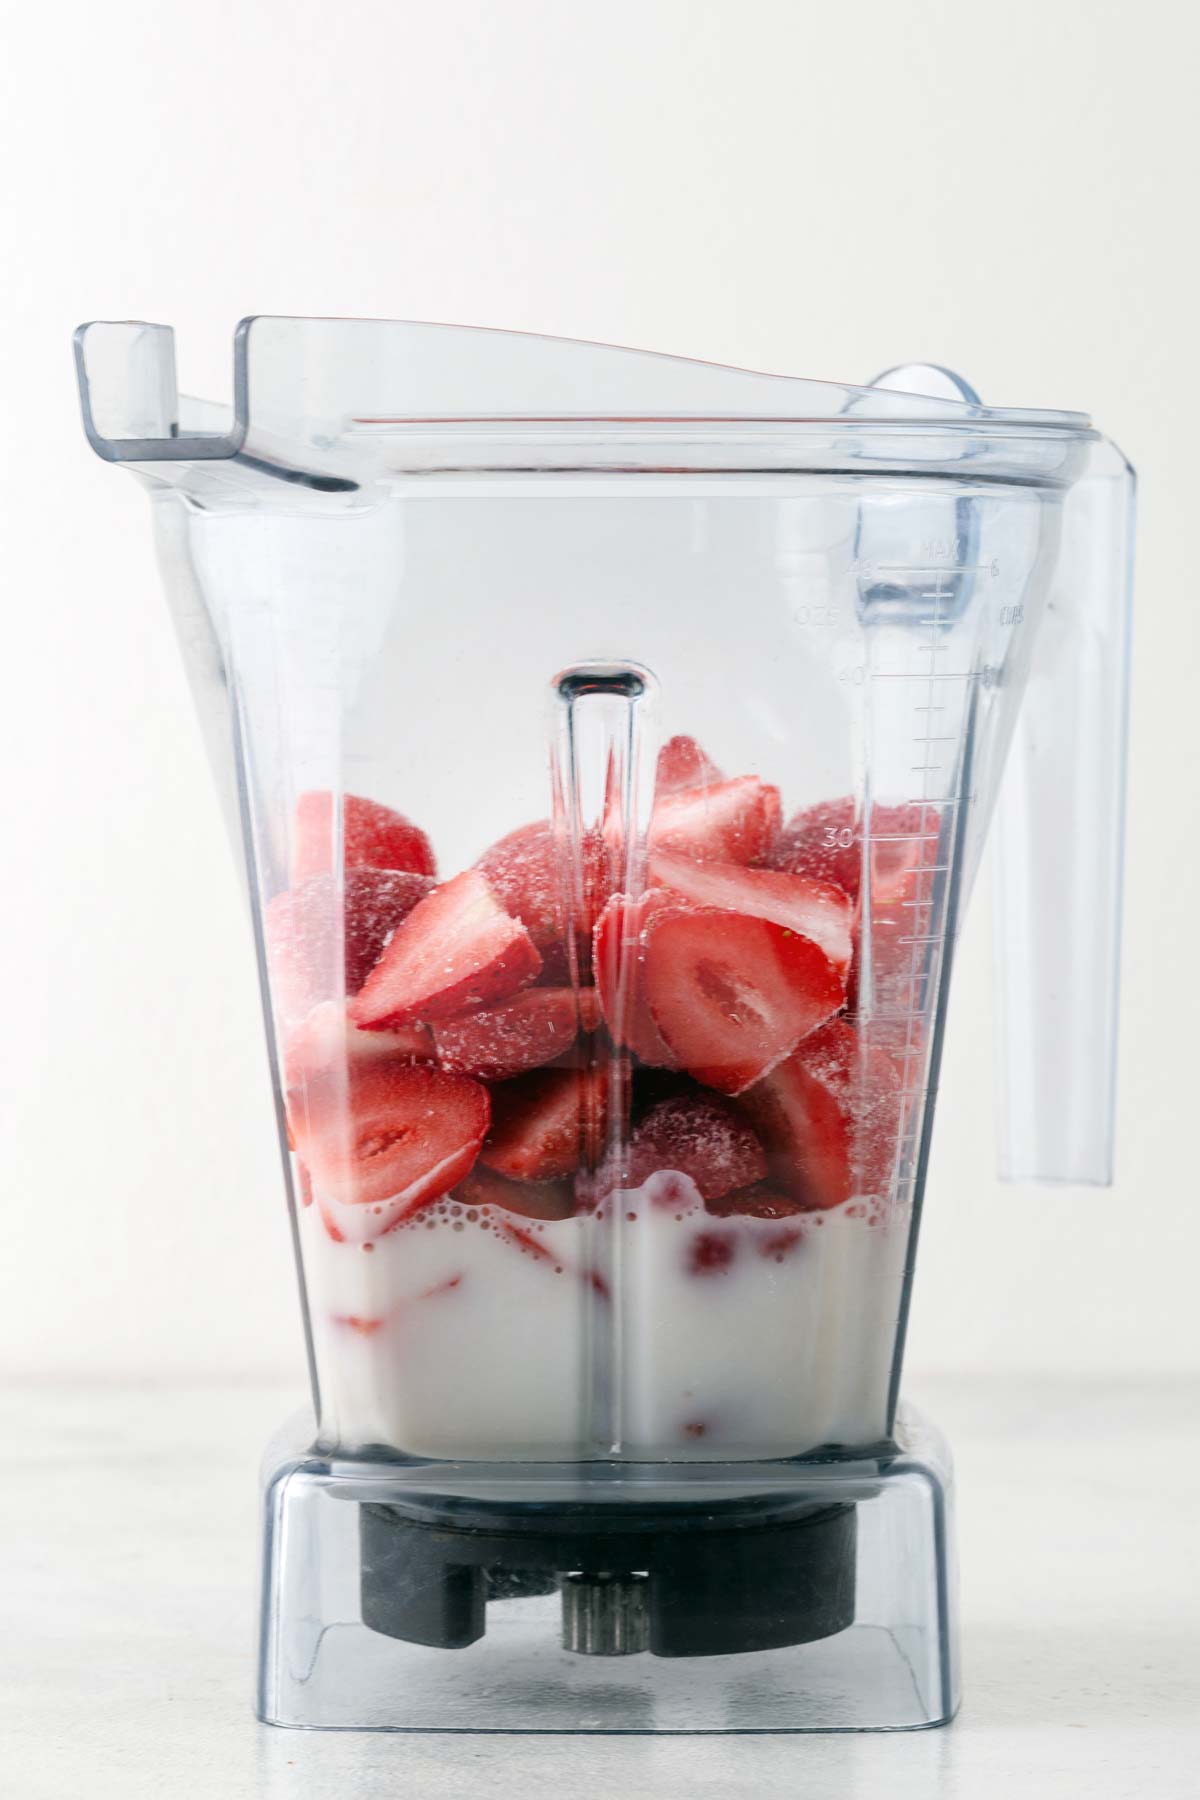 Ingredients for a strawberry smoothie bowl in a blender.